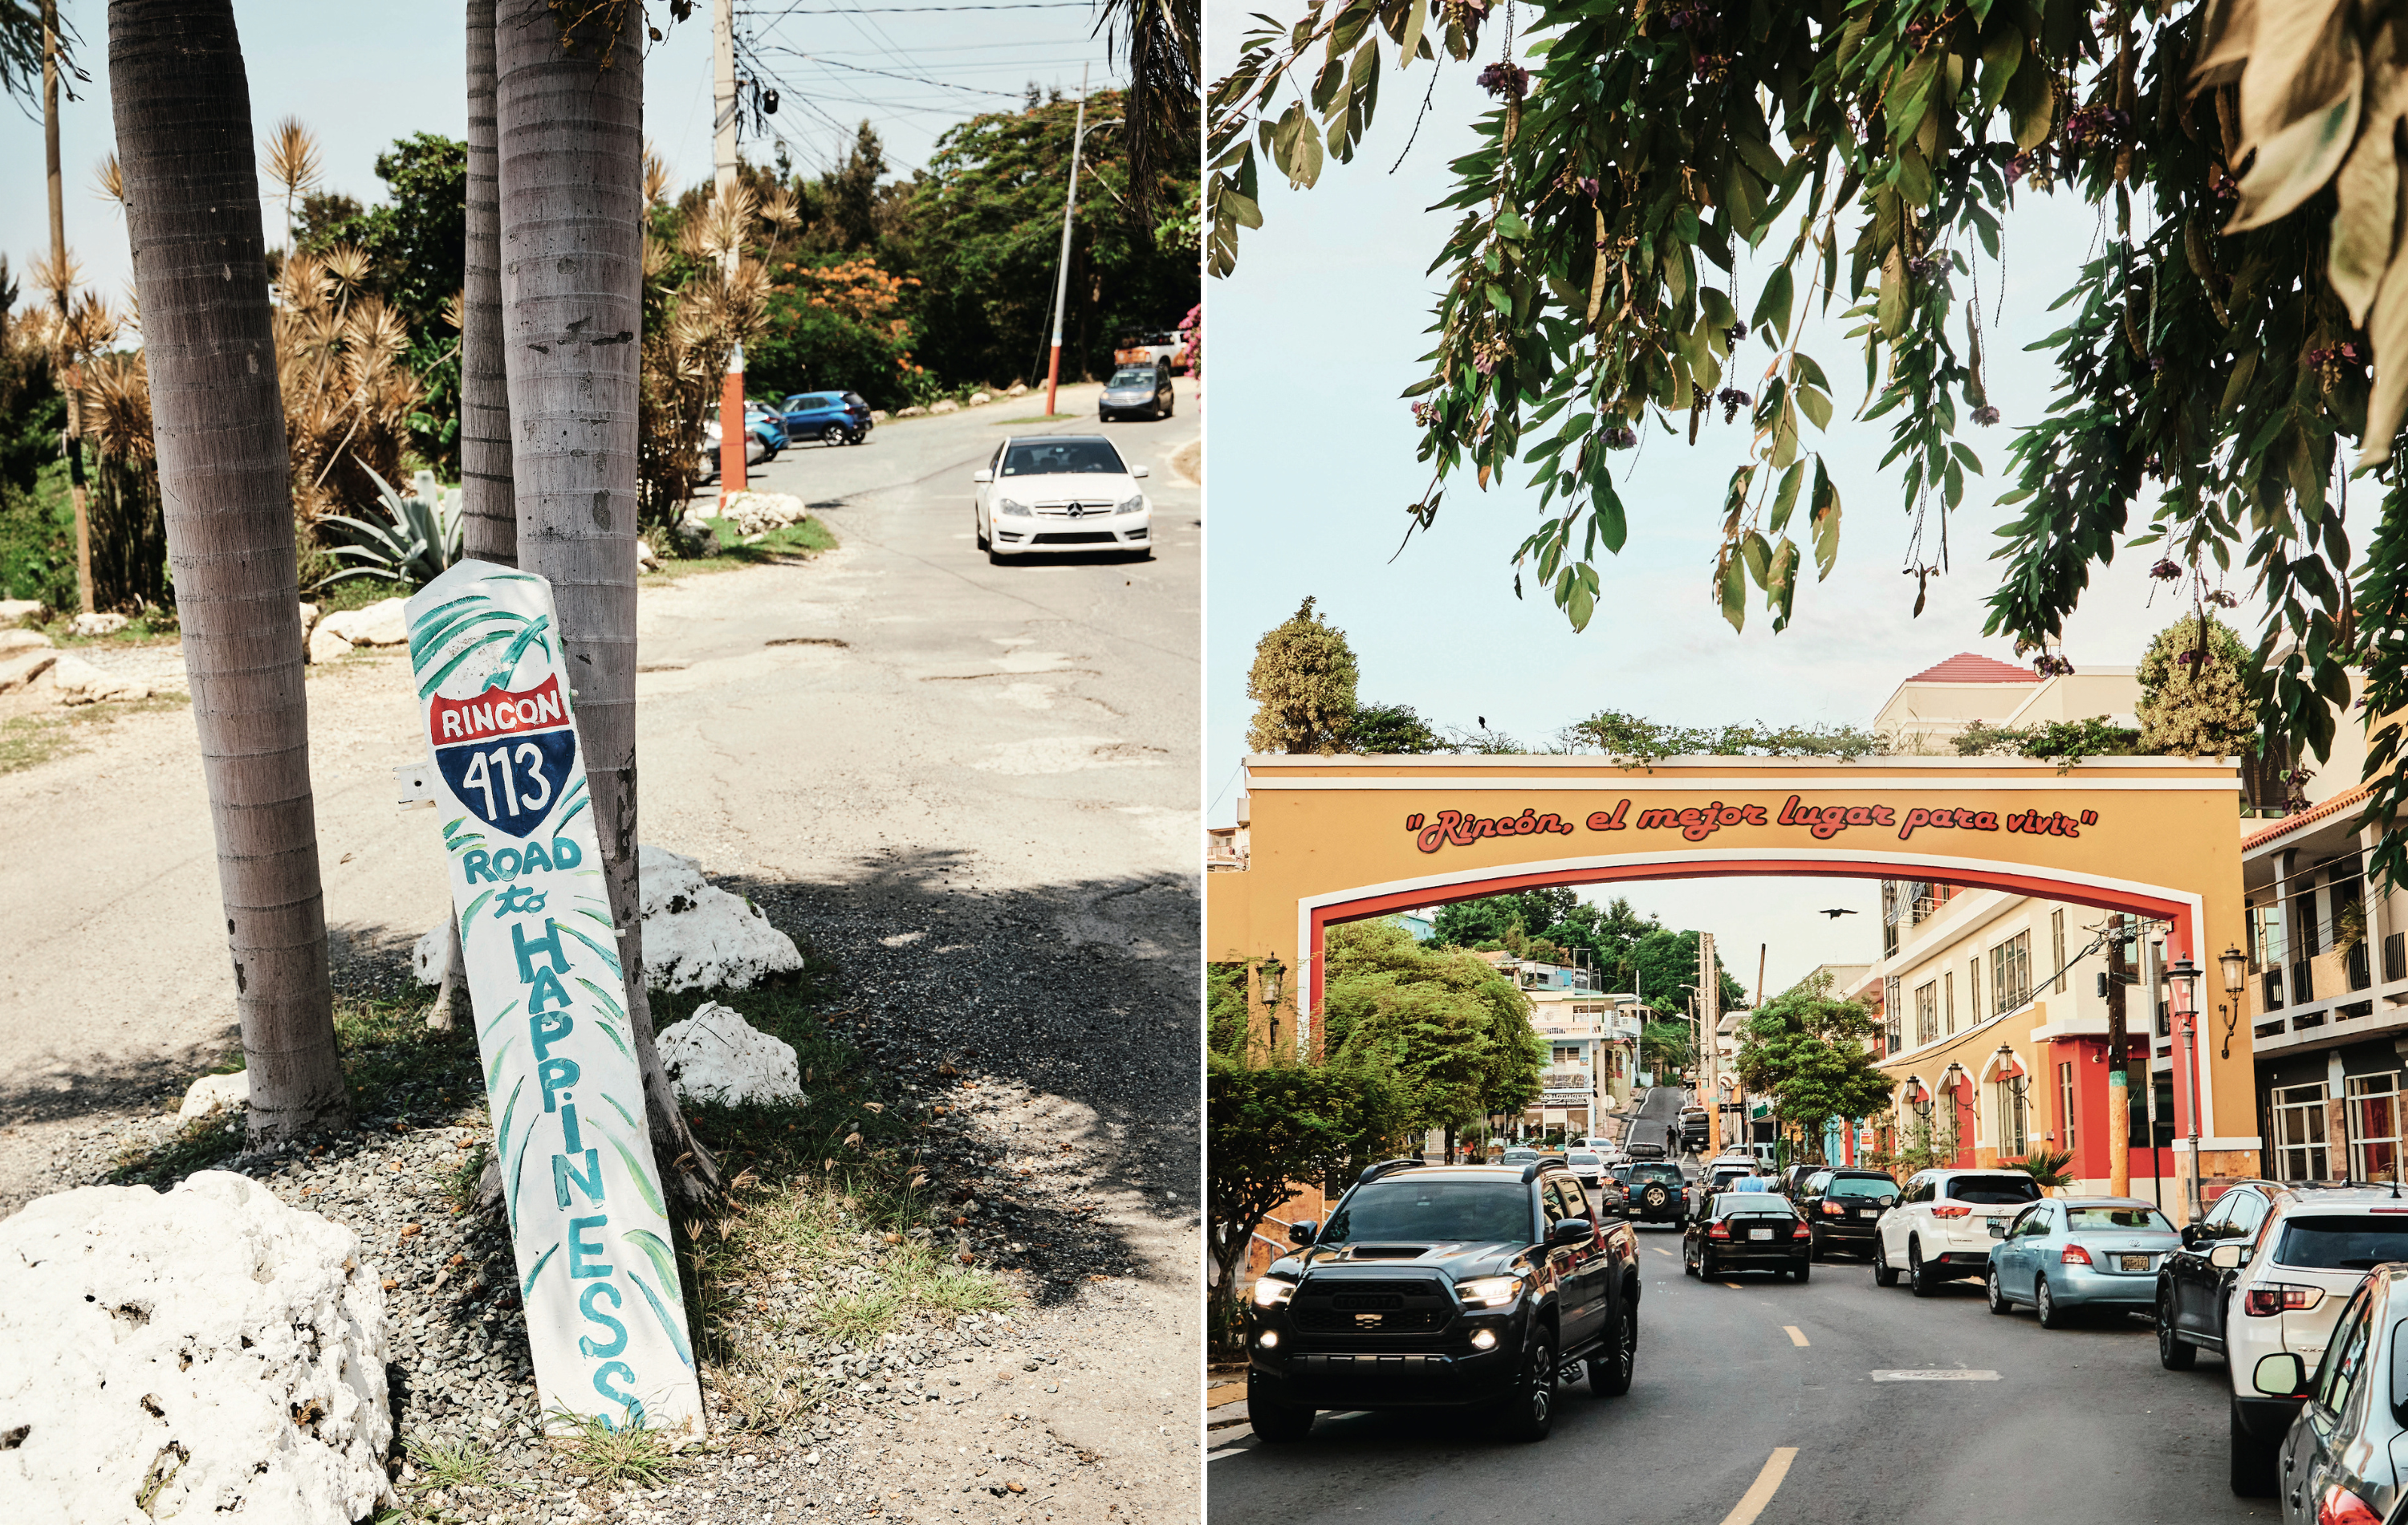 A collage of two images. Left: A painted sign shows "Rincon 413: Road to Happiness." Right: Cars on a street with orange and yellow buildings and trees.